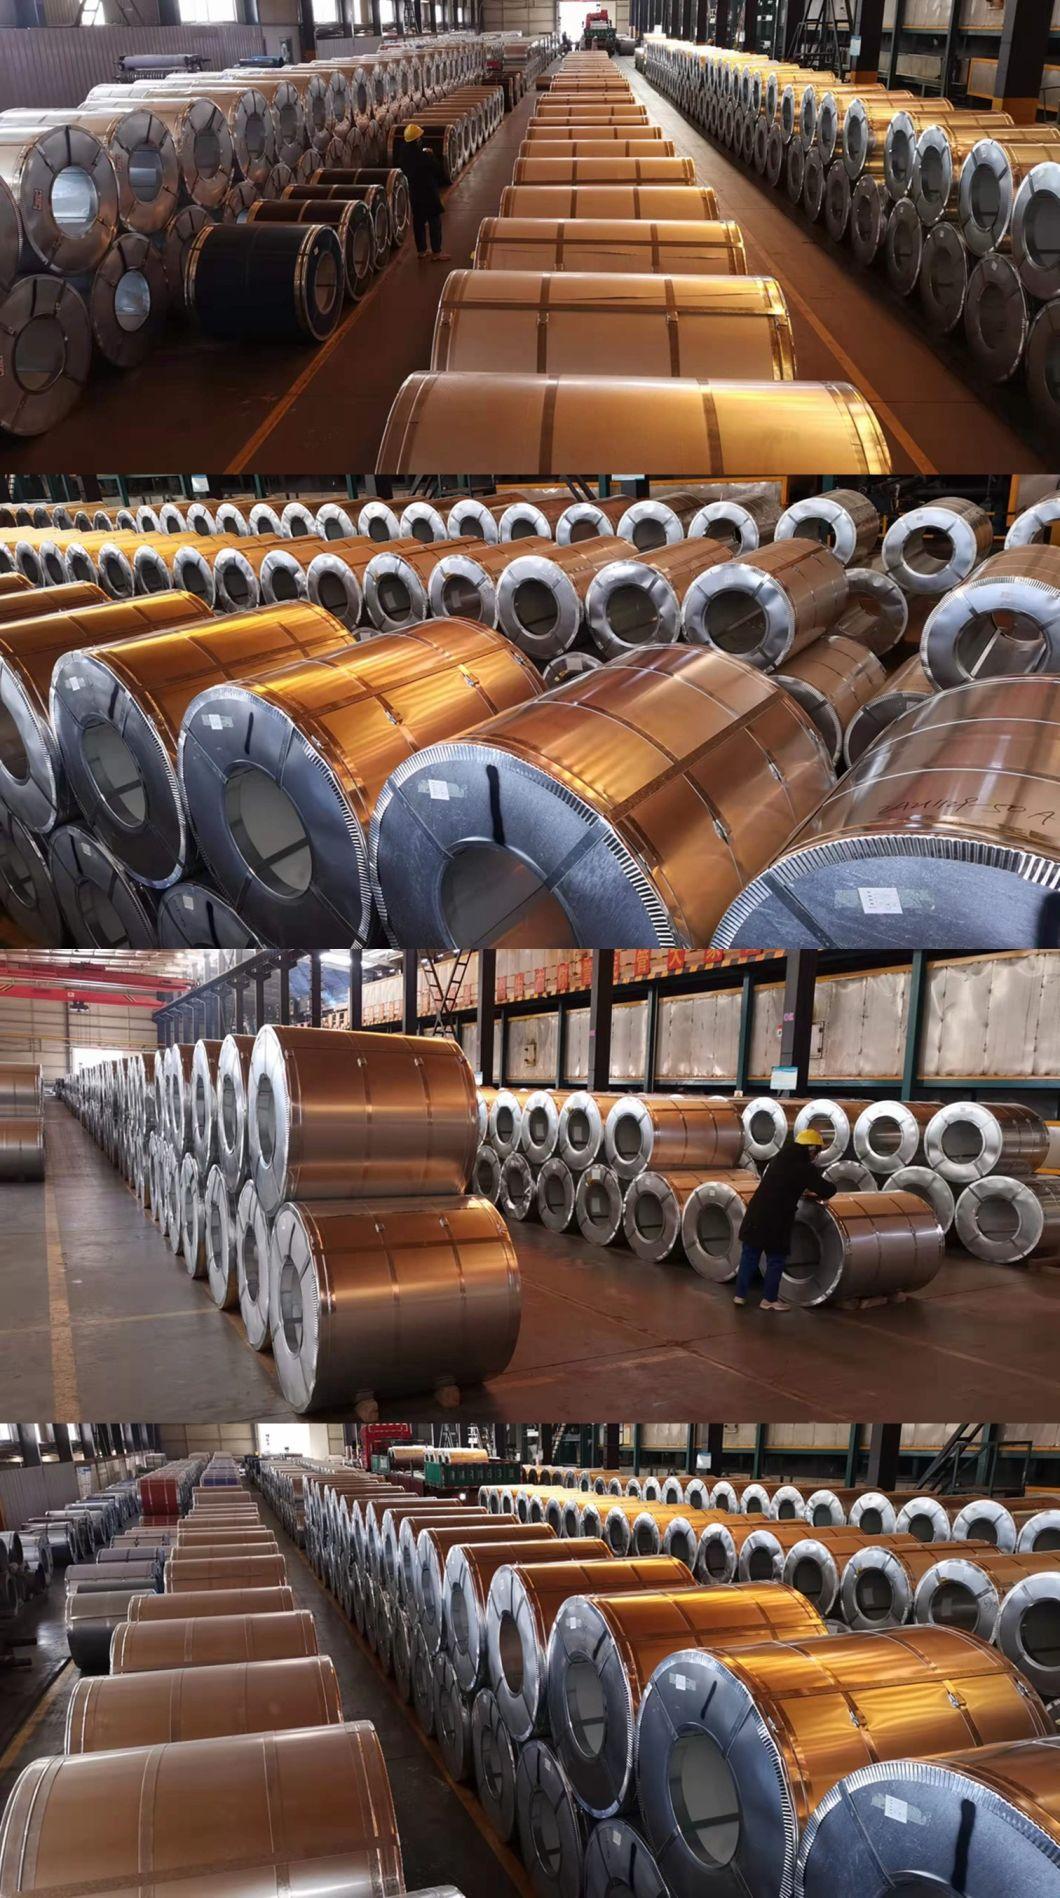 China ASTM Approved Cold Rolled Hot 201 Per Ton Price Coil Stainless Steel